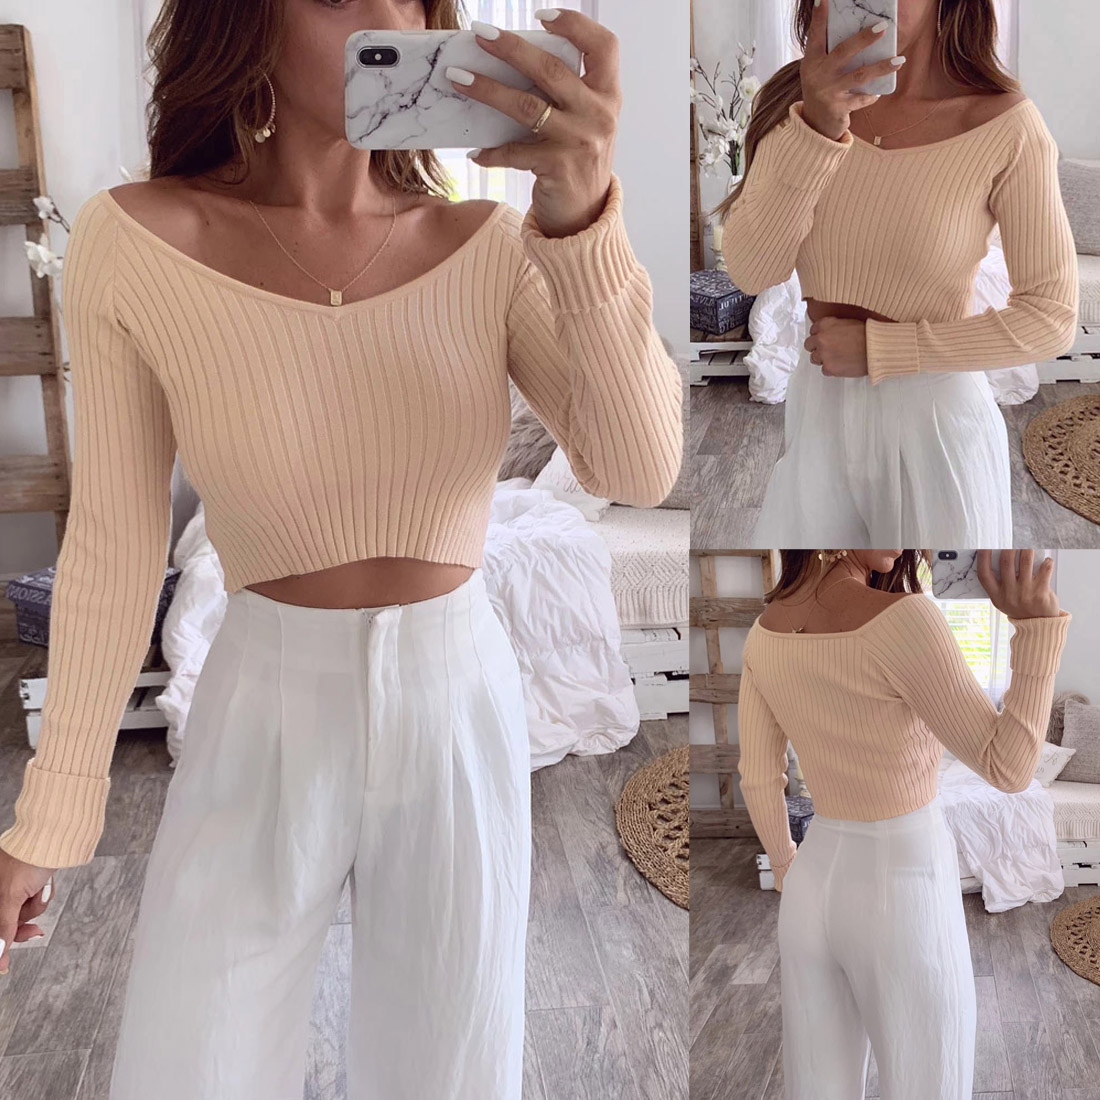 

Newest Hot Womens Ladies Autumn Office Wear Female Long Sleeve Tee Casual Knit Jumper Pullover Top T-Shirt, Beige